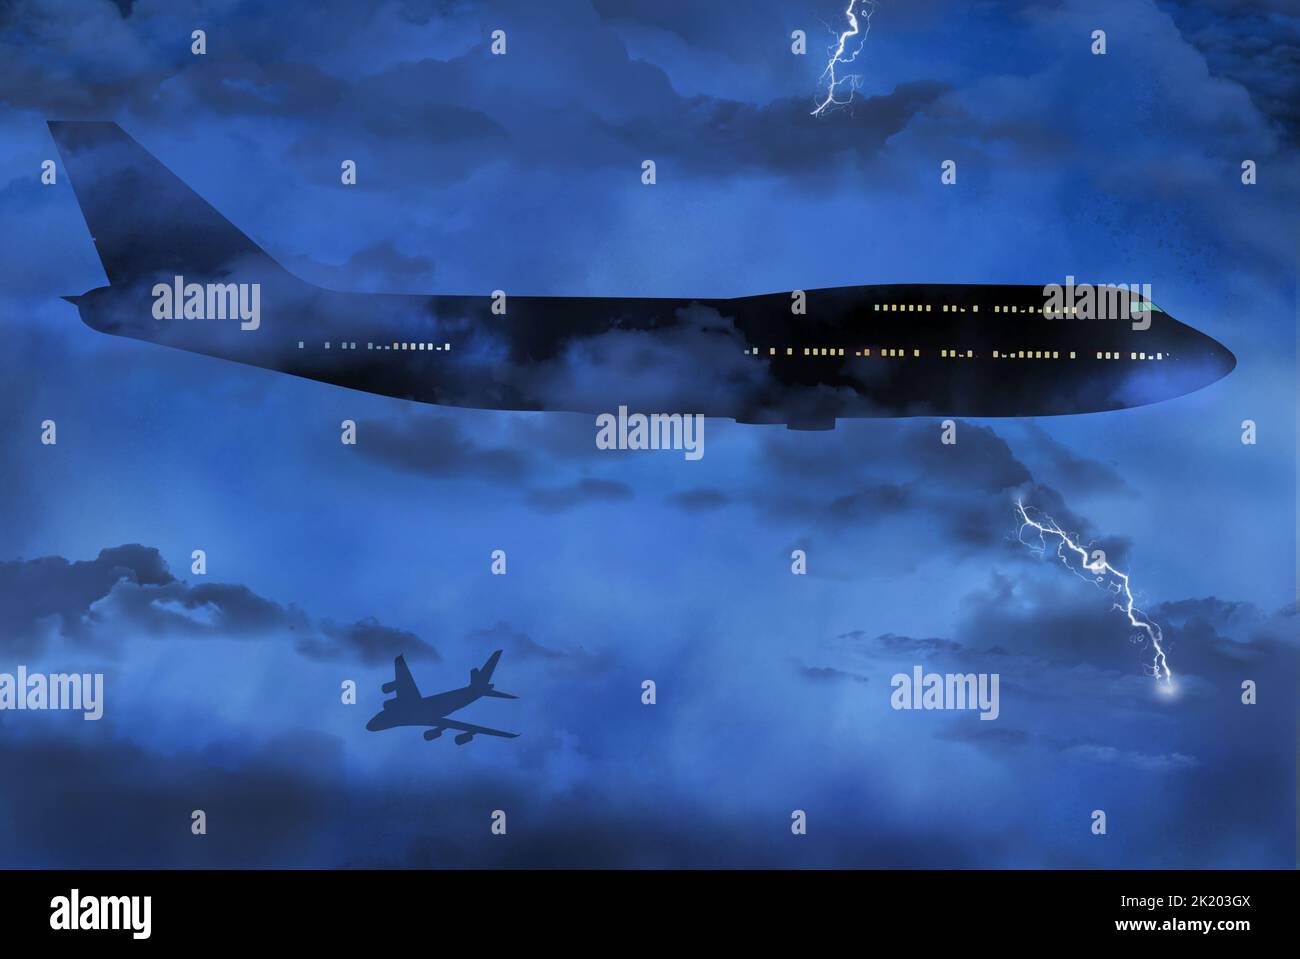 A passenger jet is seen flying in bad weather through a storm with lightning at night in this 3-d illustration. Stock Photo